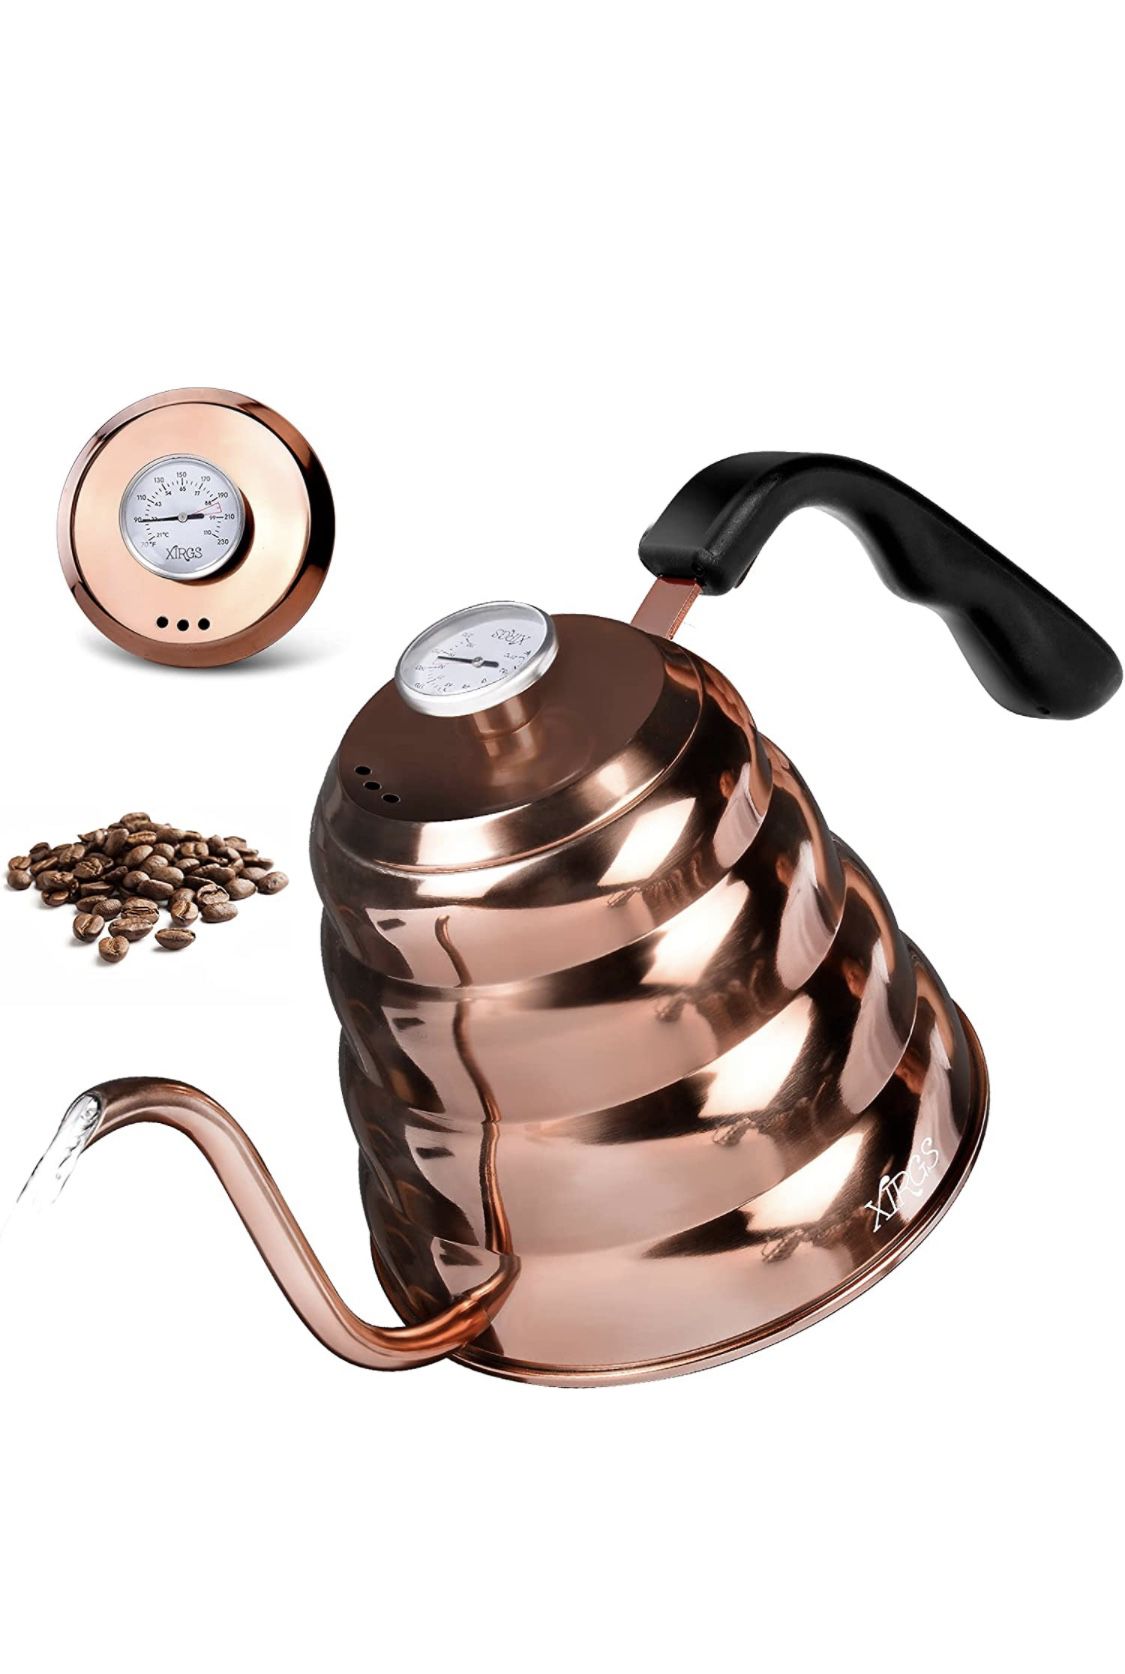 Pour Over Kettle- Copper induction Top Friendly